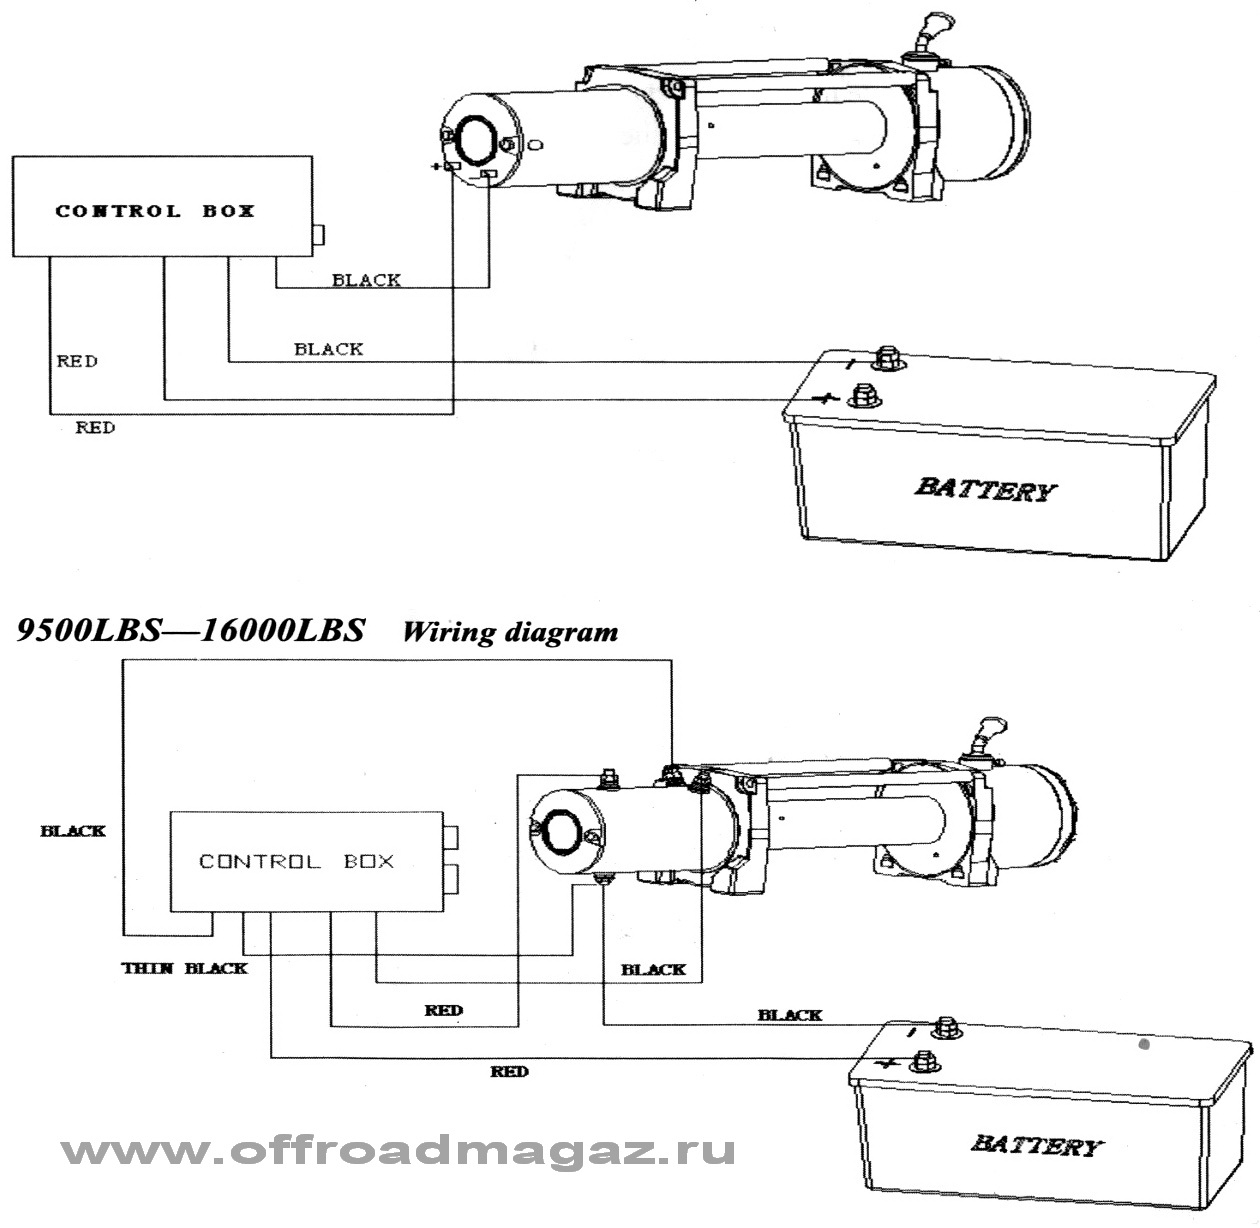 Warn Winch Wiring Diagram Solenoid At 62135 To Beautiful With At - Warn Winch Wiring Diagram Solenoid